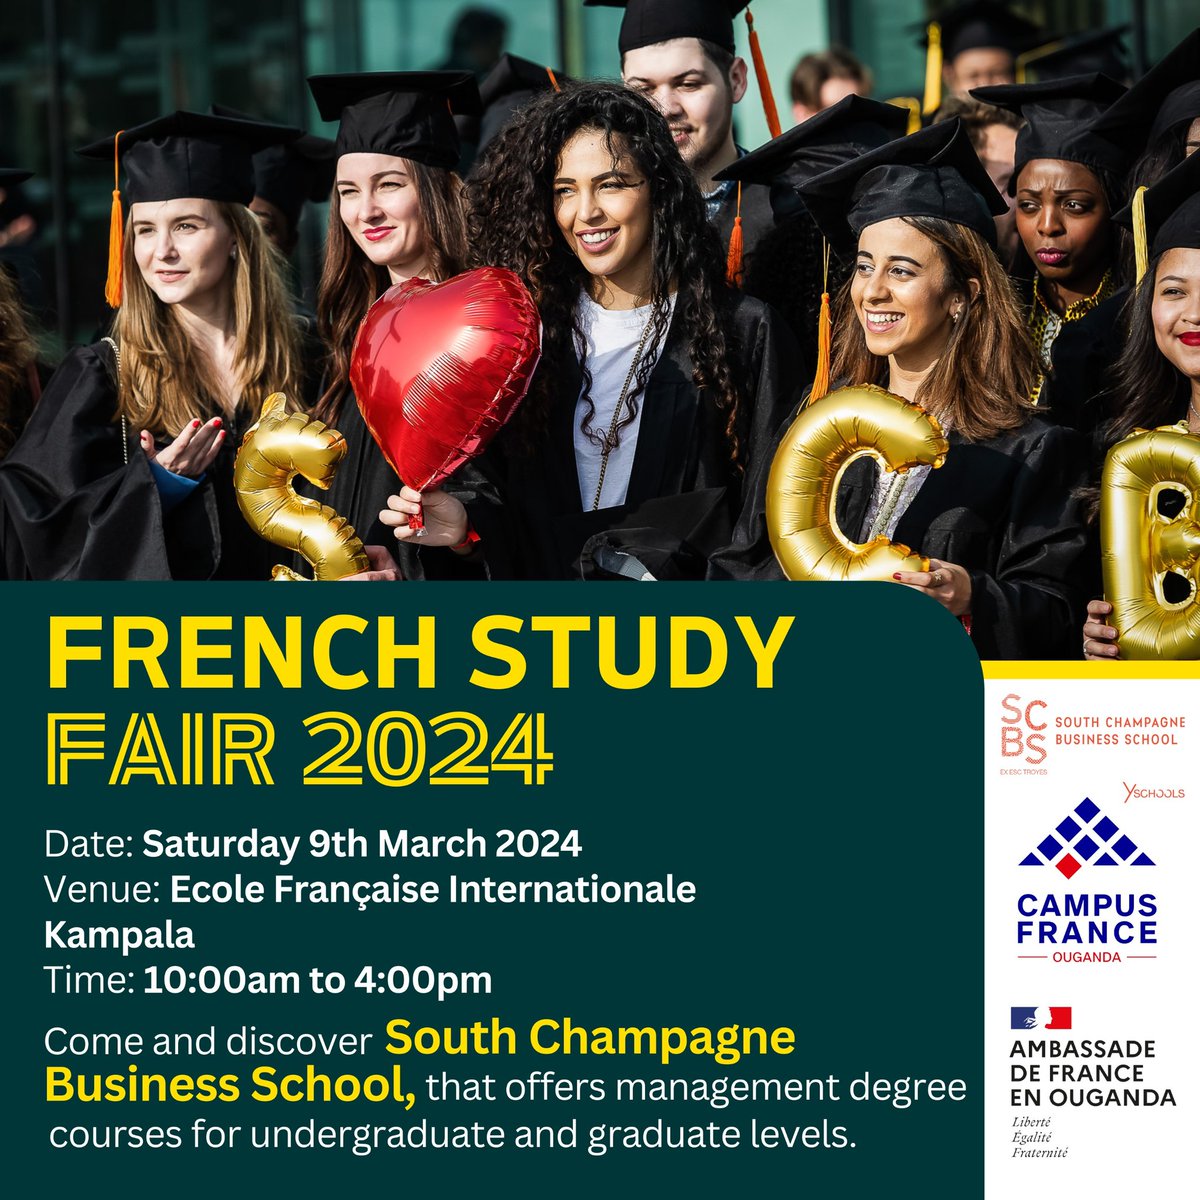 Is Business Studies your thing ? We have #SouthChampagneBusinessSchool for you as well. Pass by @lfkampala right now to speak to a represententive to guide you on how to get admitted. #RendezvousenFrance 🇫🇷